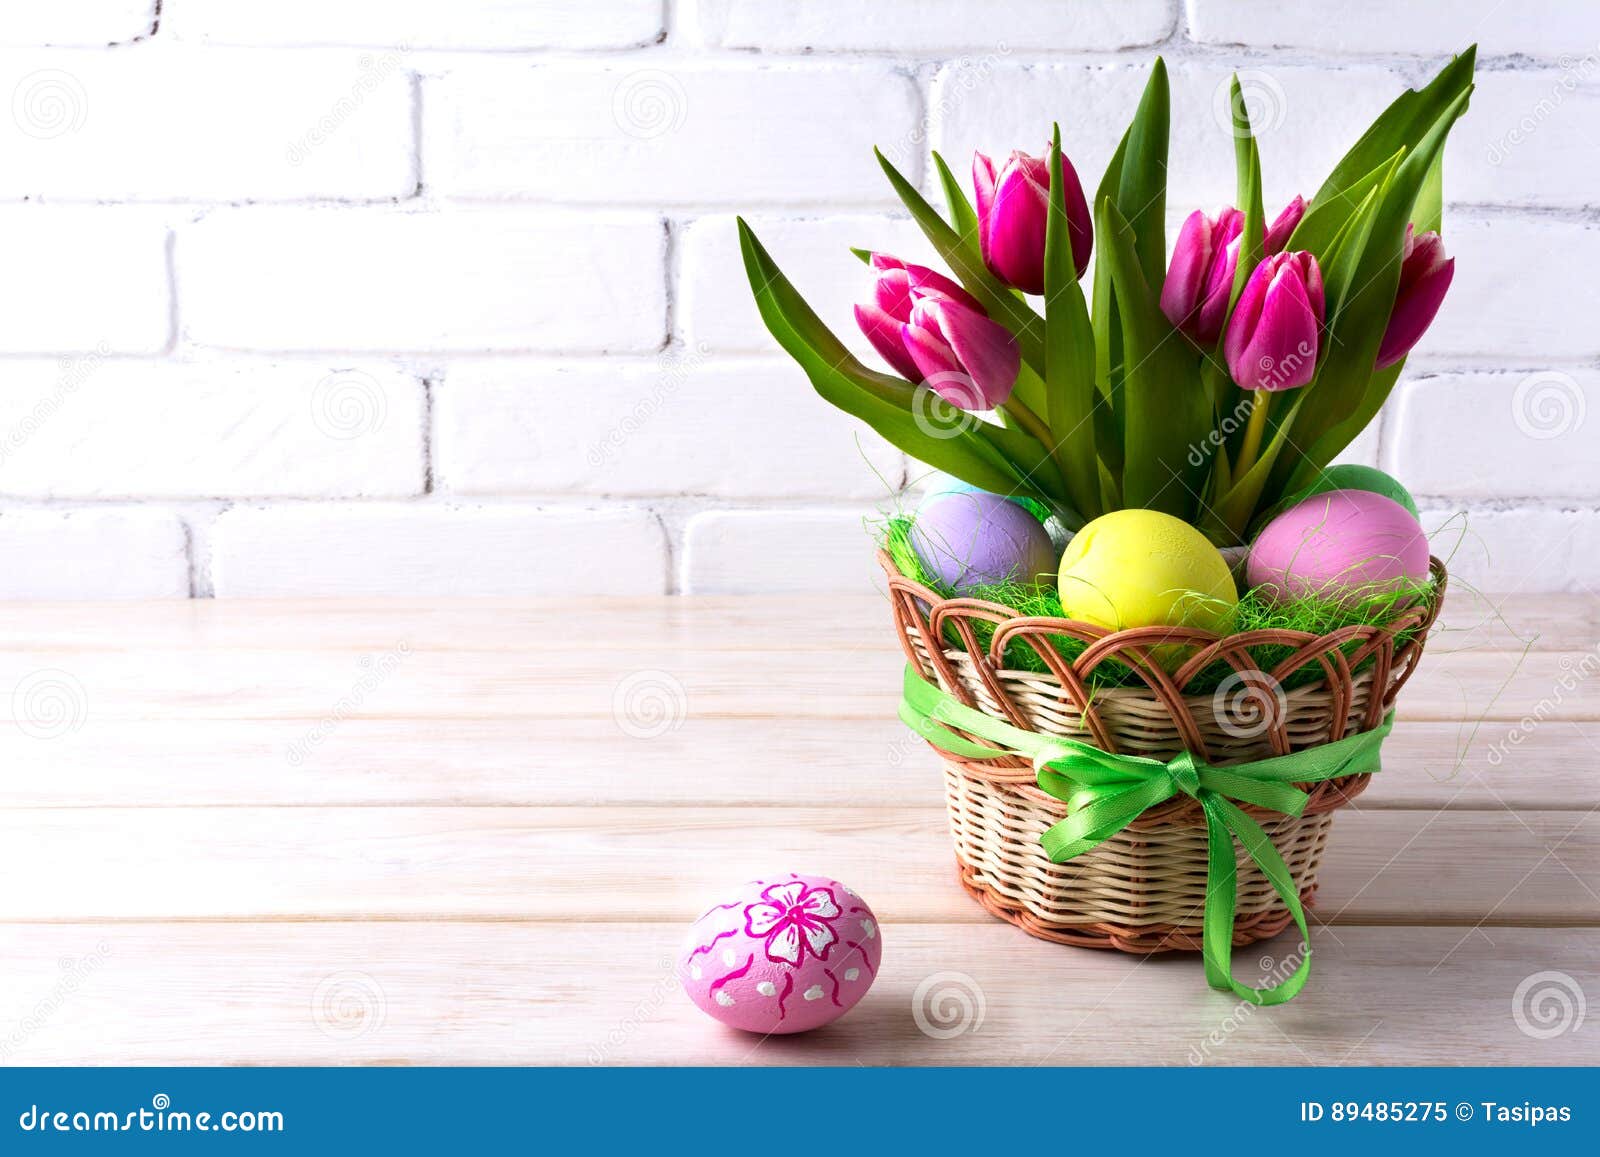 Easter Table Centerpiece with Pink Tulip Stock Image - Image of card ...